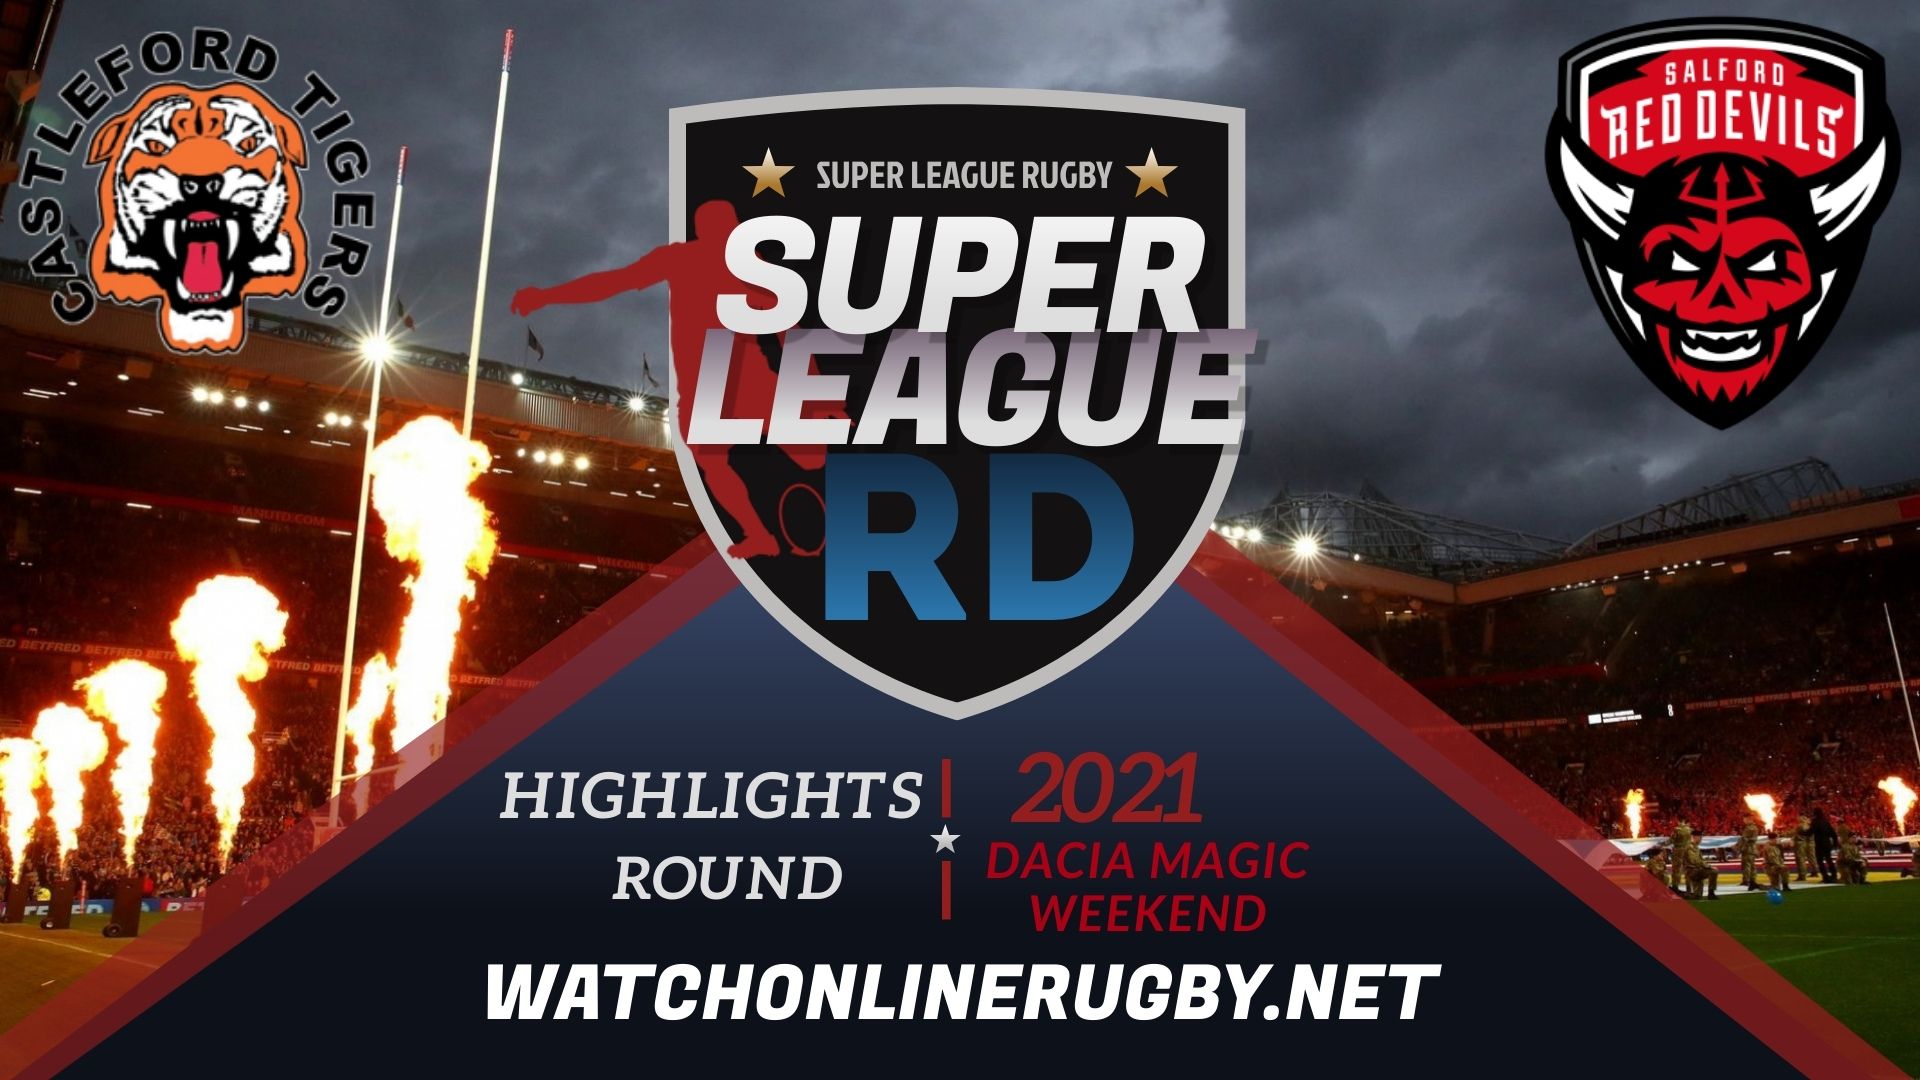 Castleford Tigers Vs Salford Red Devils Super League Rugby 2021 RD Dacia Magic Weekend